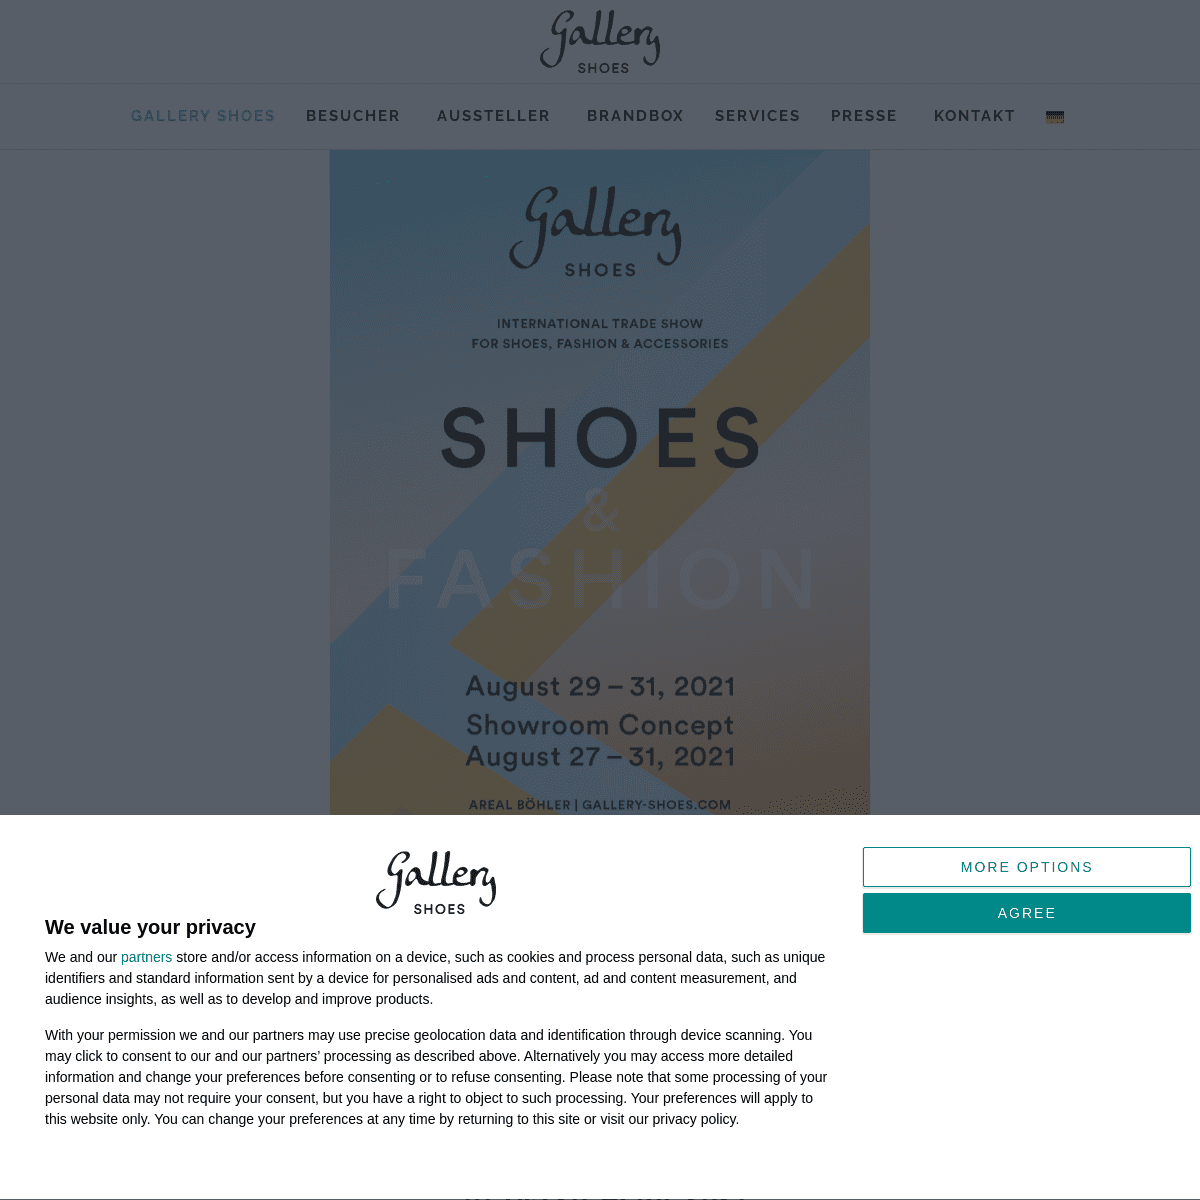 A complete backup of https://gallery-shoes.com